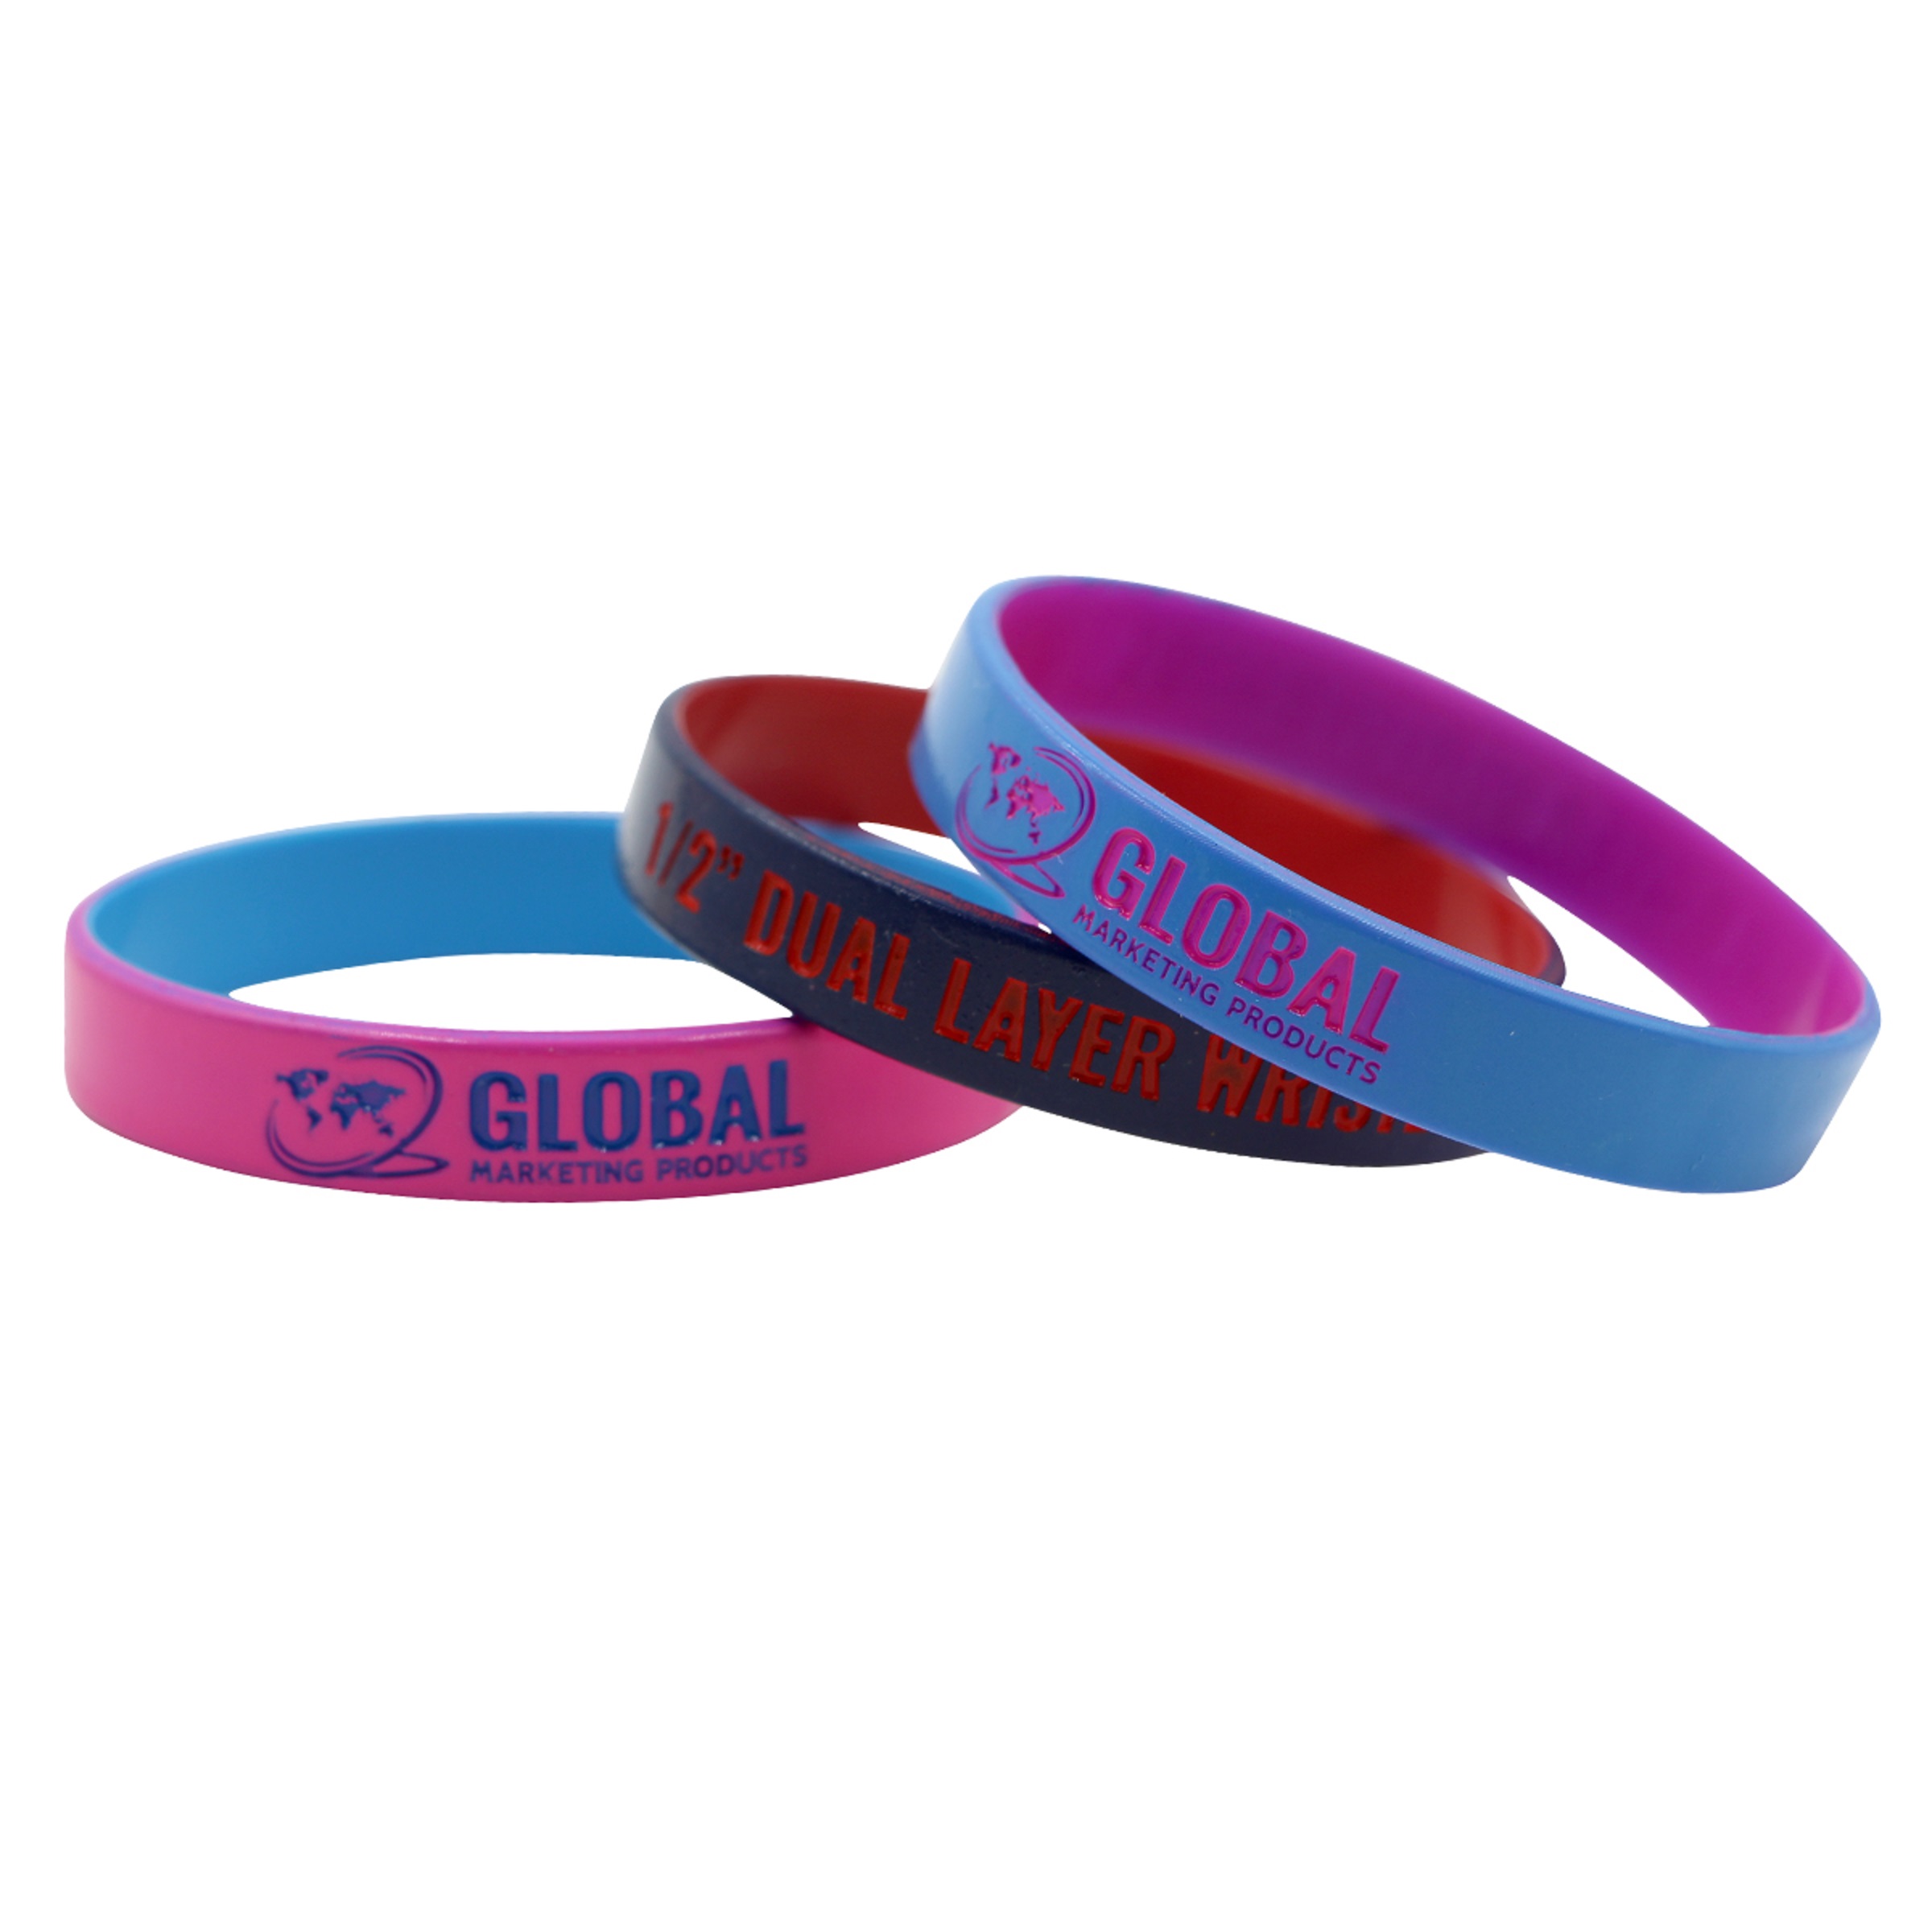 Dual Layer/Color Coated Silicone Wristbands - 1/2